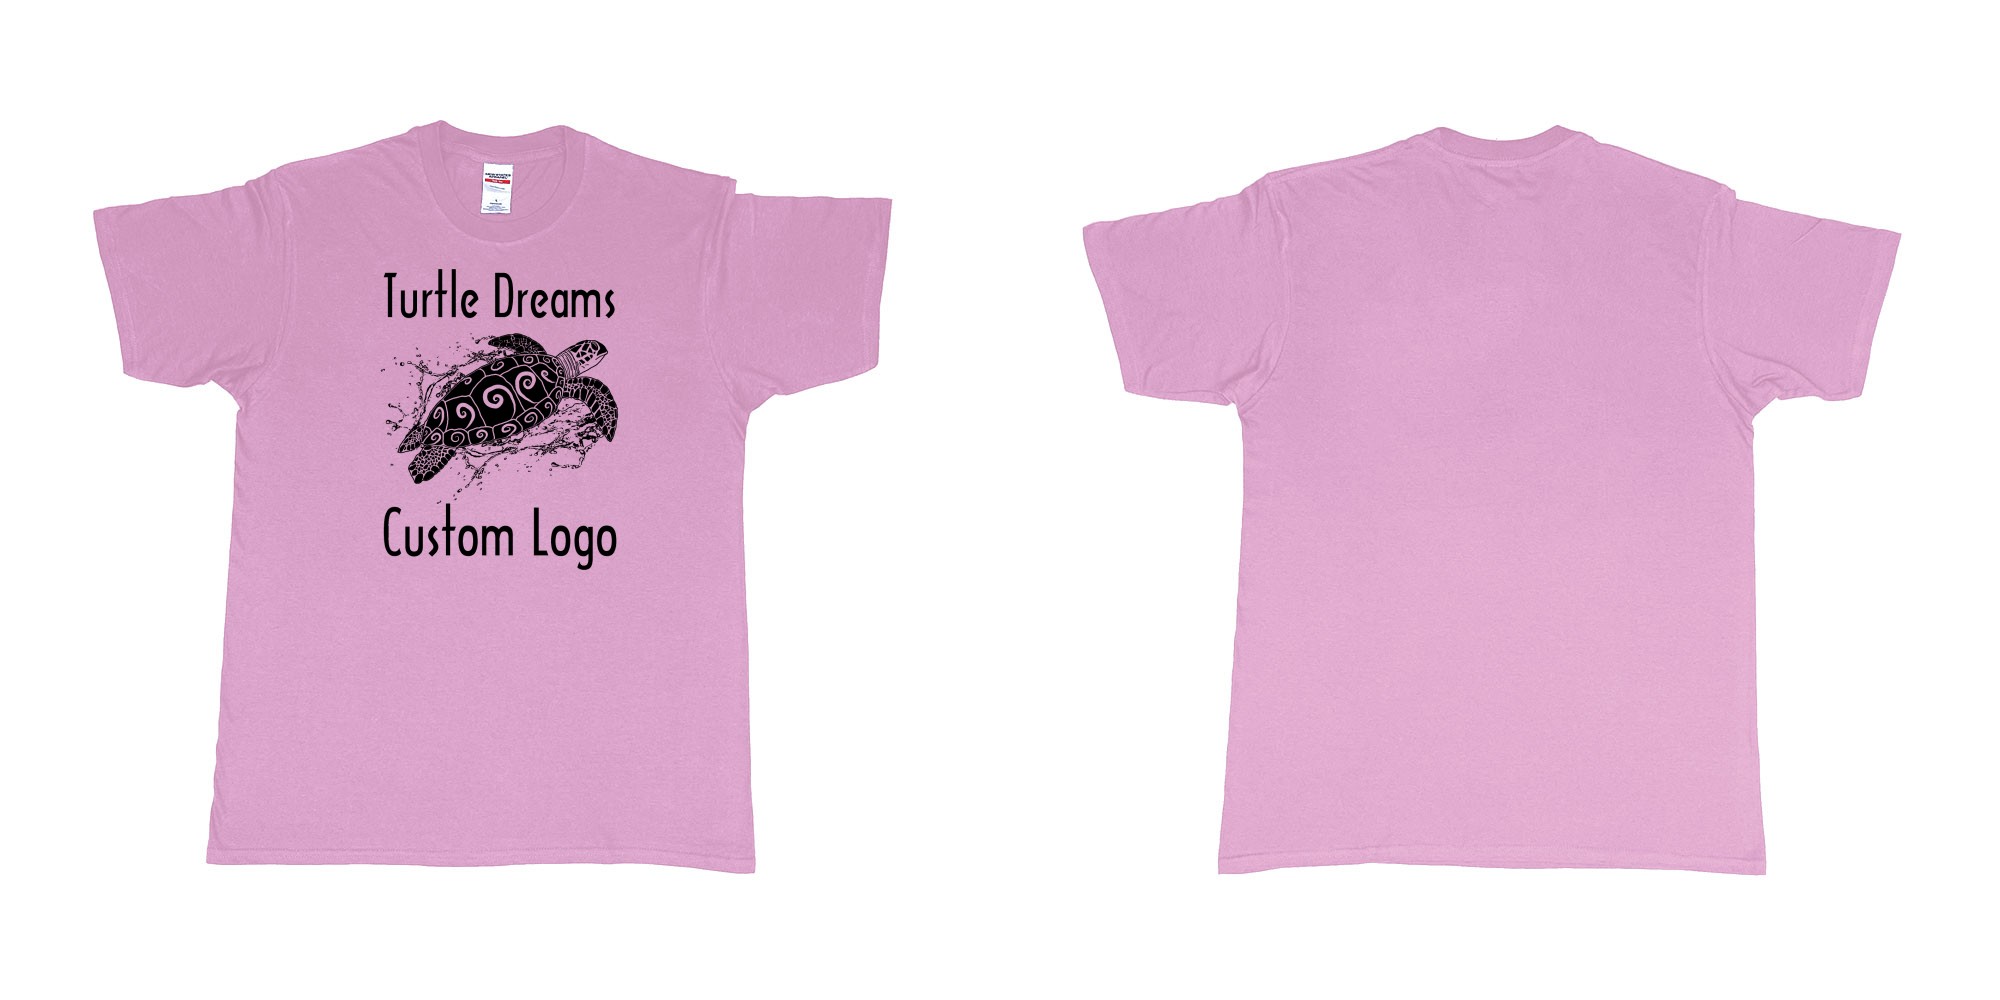 Custom tshirt design turtle dreams custom logo design in fabric color light-pink choice your own text made in Bali by The Pirate Way